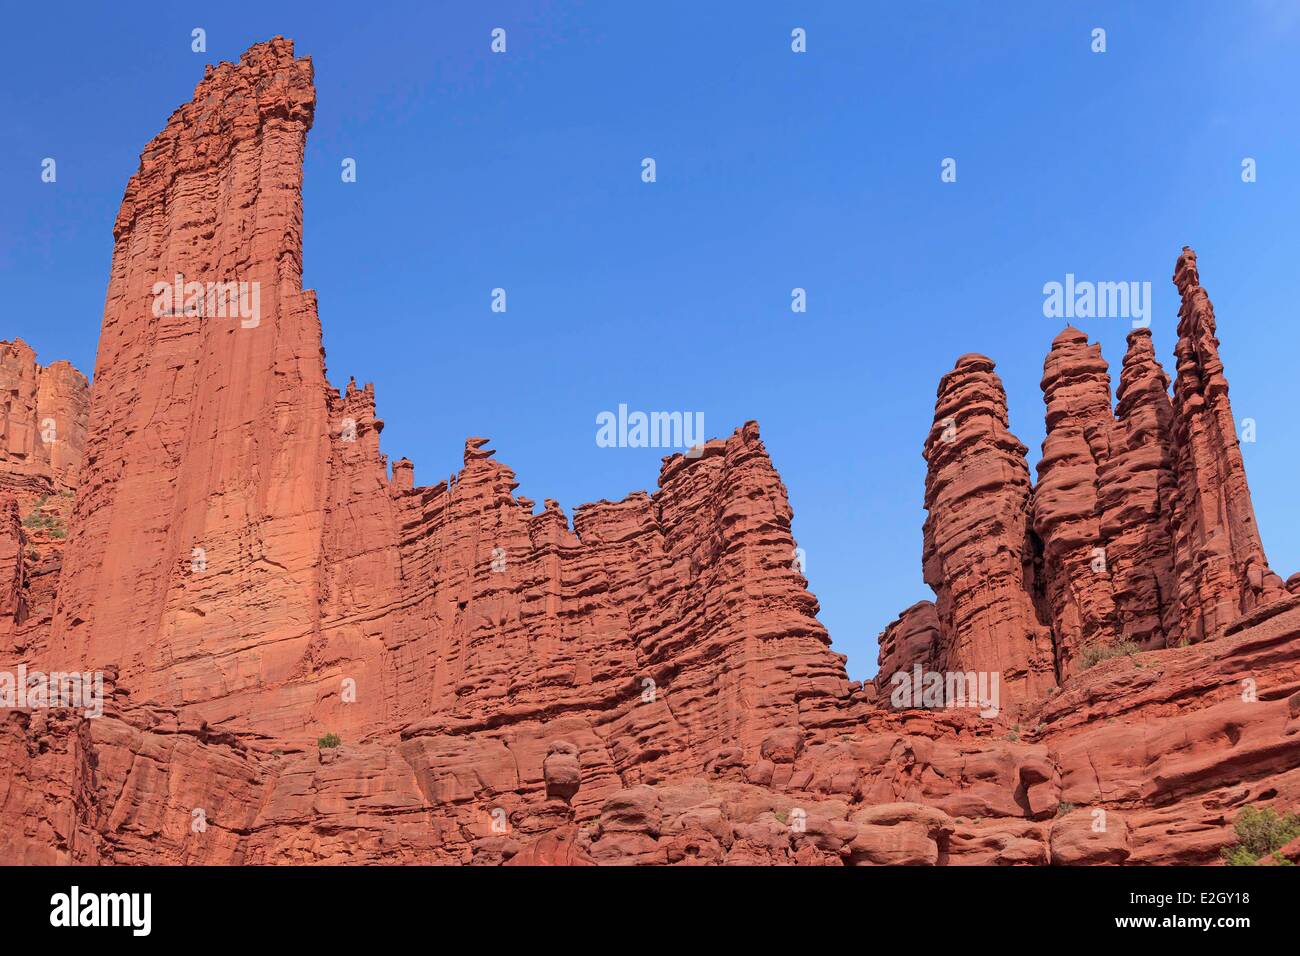 United States Utah Colorado Plateau Fisher Towers rock formations near Moab Stock Photo